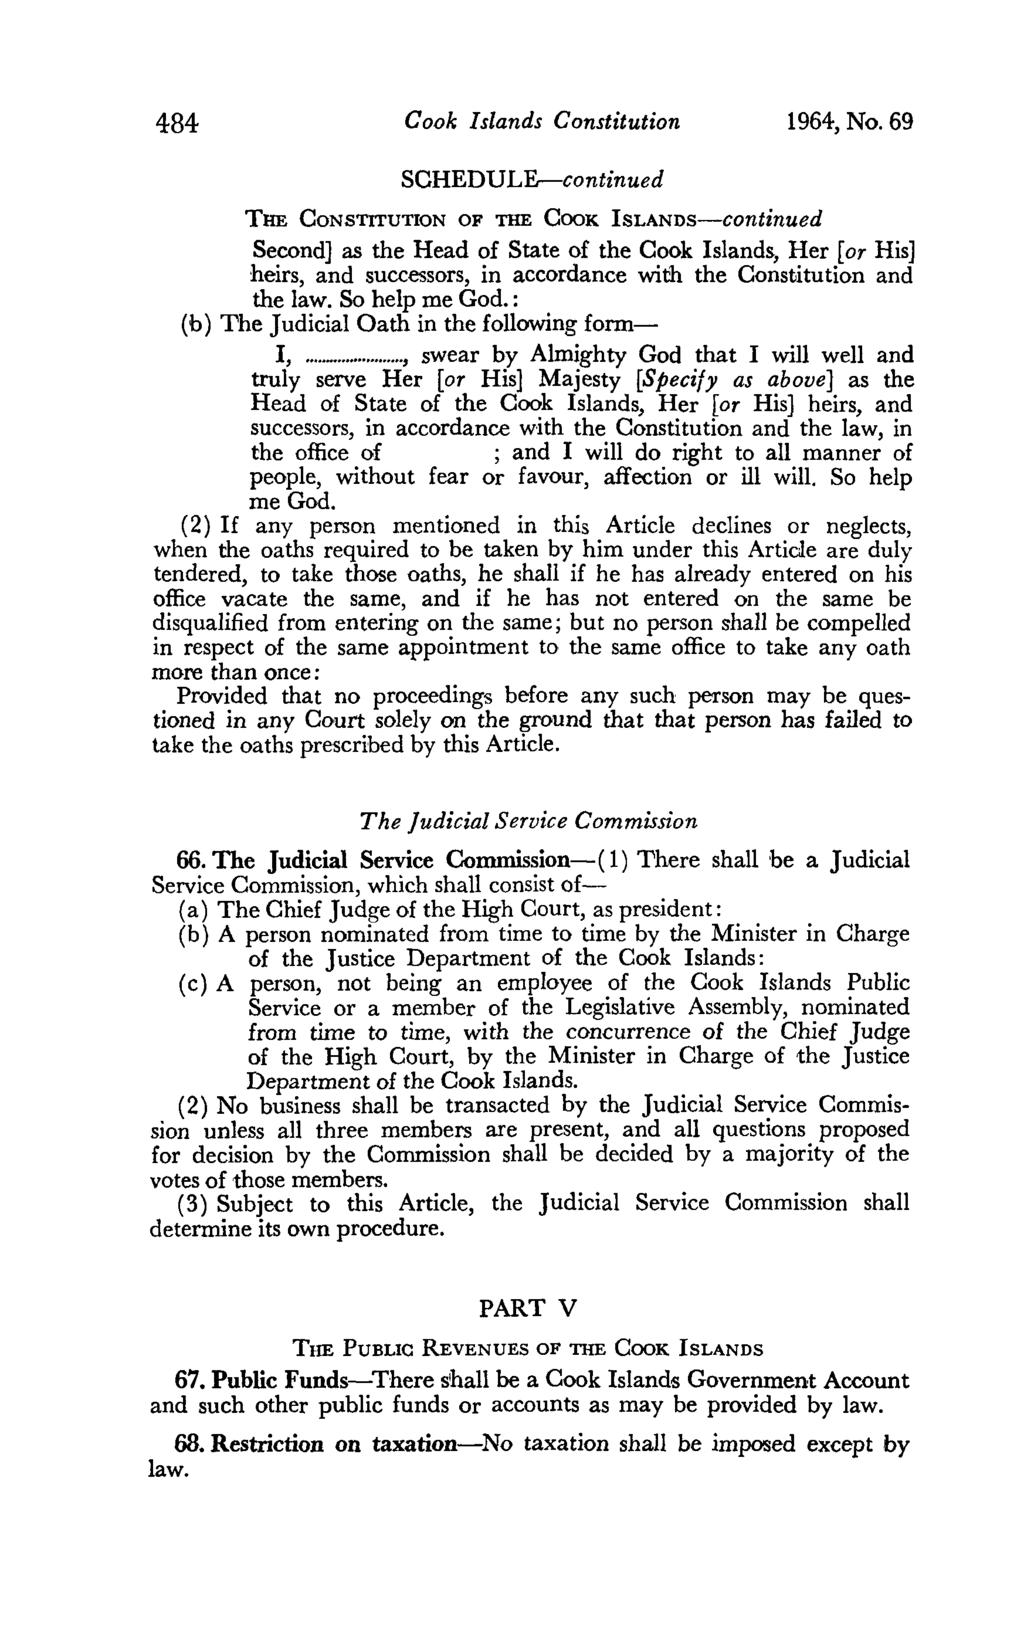 484 Cook Islands Constitution 1964, No. 69 Second] as the Head of State of the Cook Islands, Her [or His] heirs, and successors, in accordance with the Constitution and the law. So help me God.